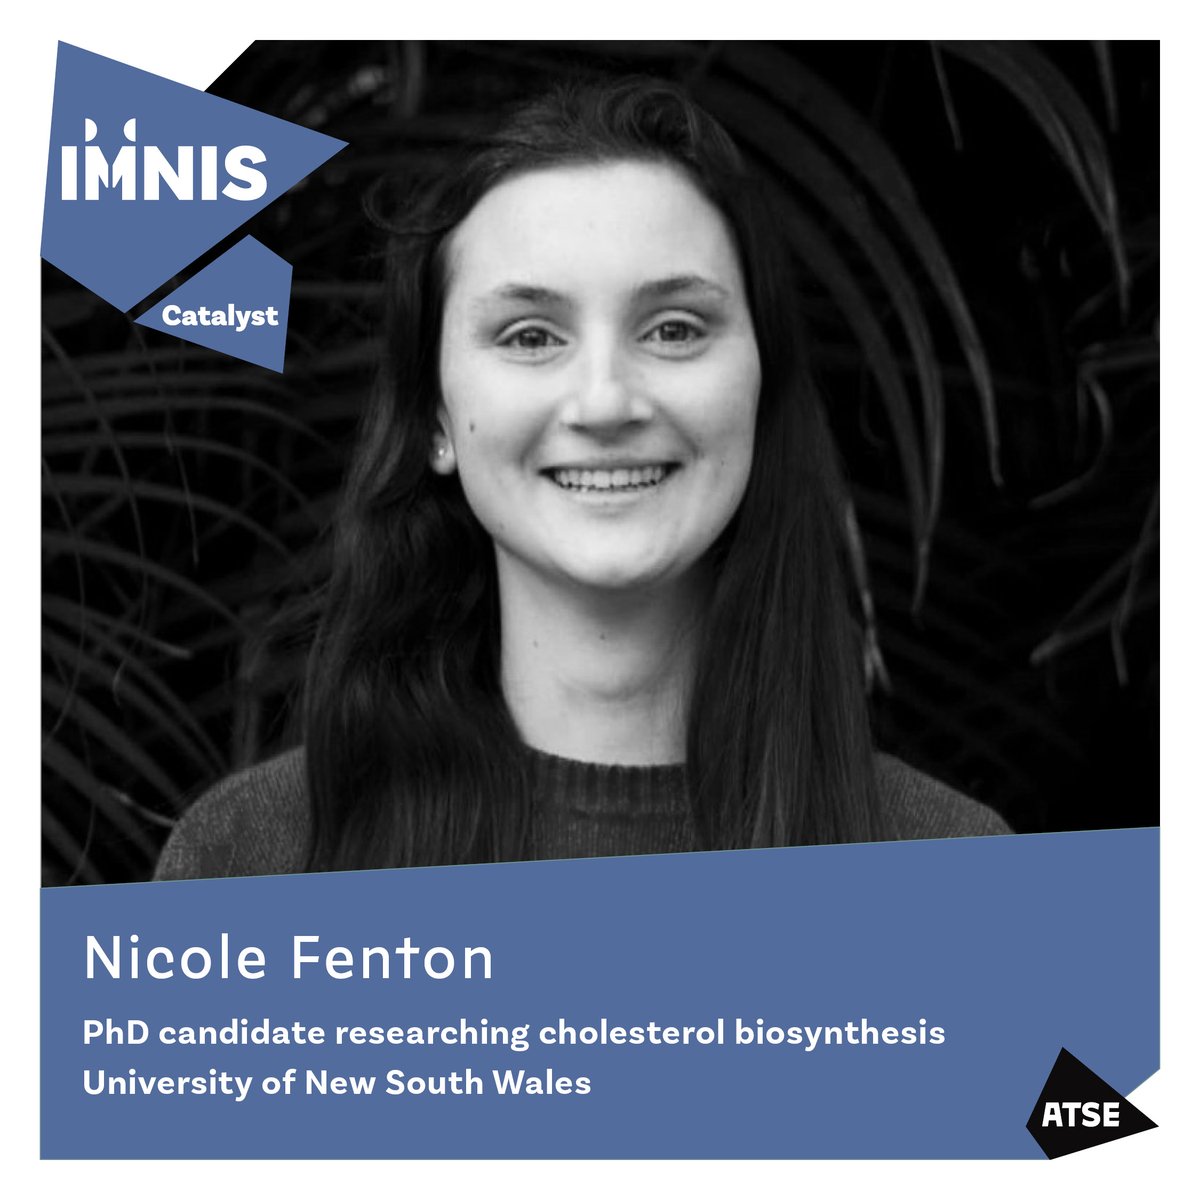 ✨We're excited to welcome @NicoleMFenton to the #IMNISCatalyst program. Our IMNIS Catalyst program supports inspiring leaders in STEM to become ambassadors for their professions through unique professional development and networking. 🔗More – atse.org.au/news-and-event…